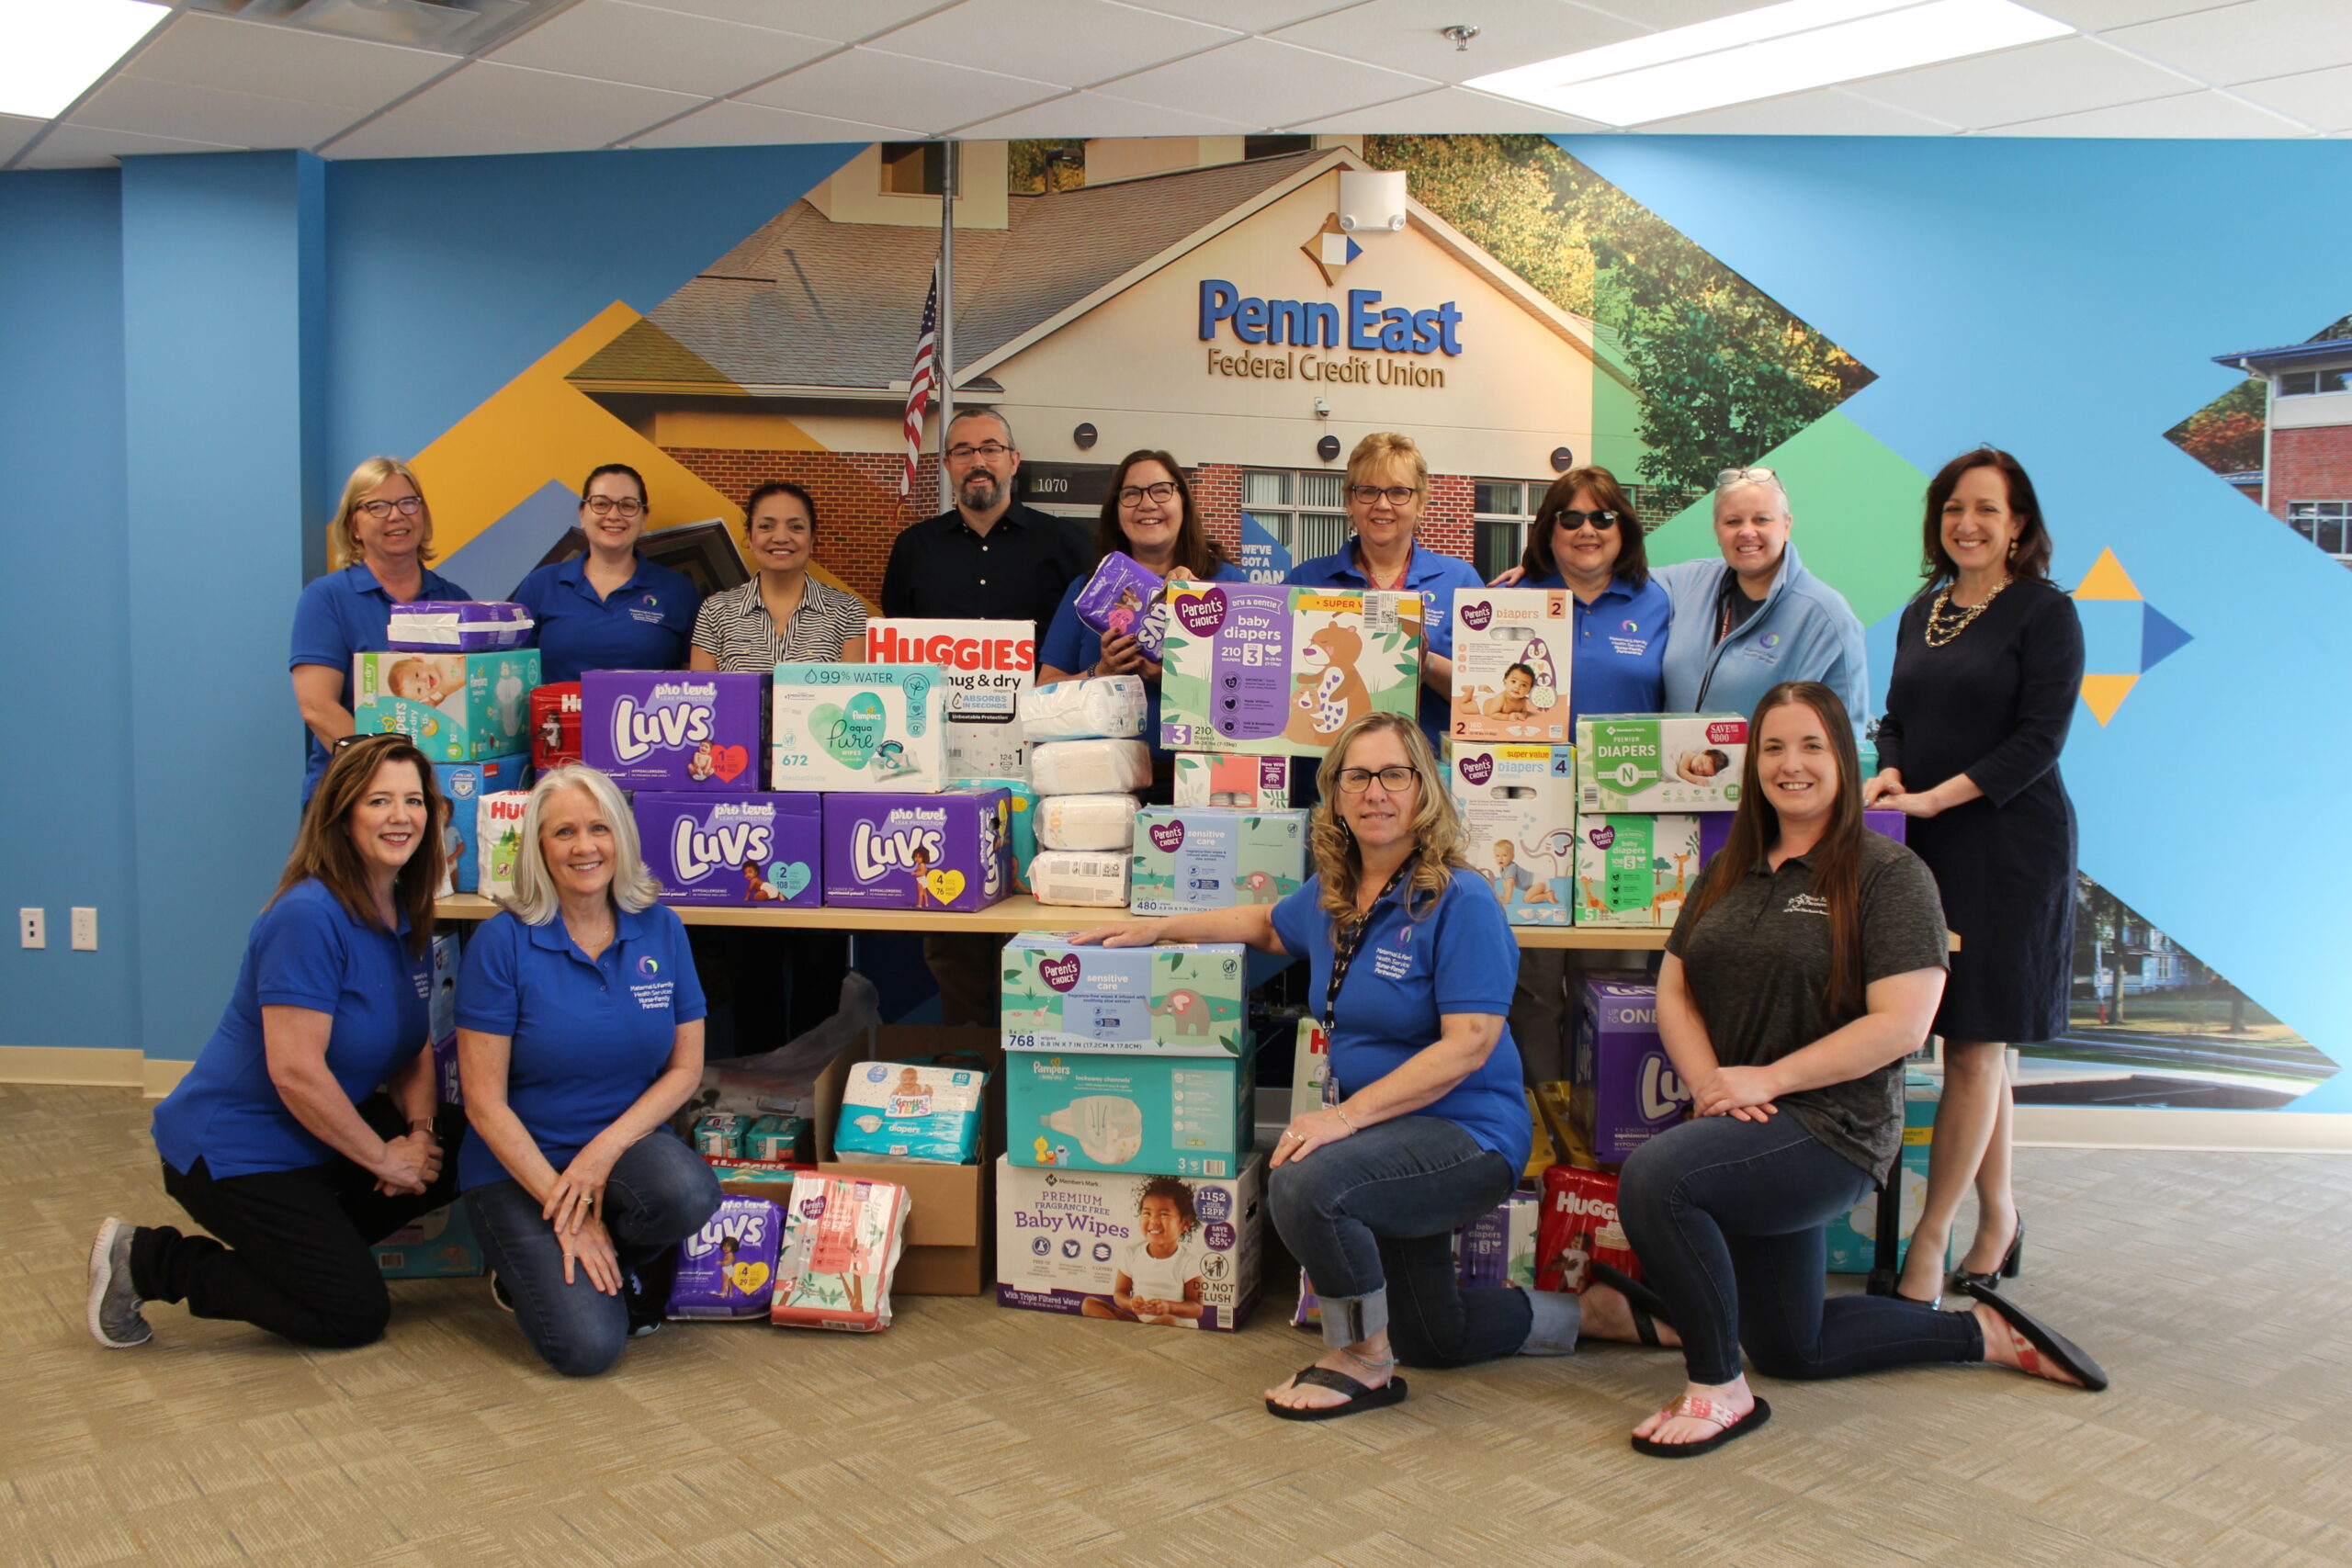 Penn East FCU Donates 14,000 Diapers and Baby Wipes to MFHS Featured Image